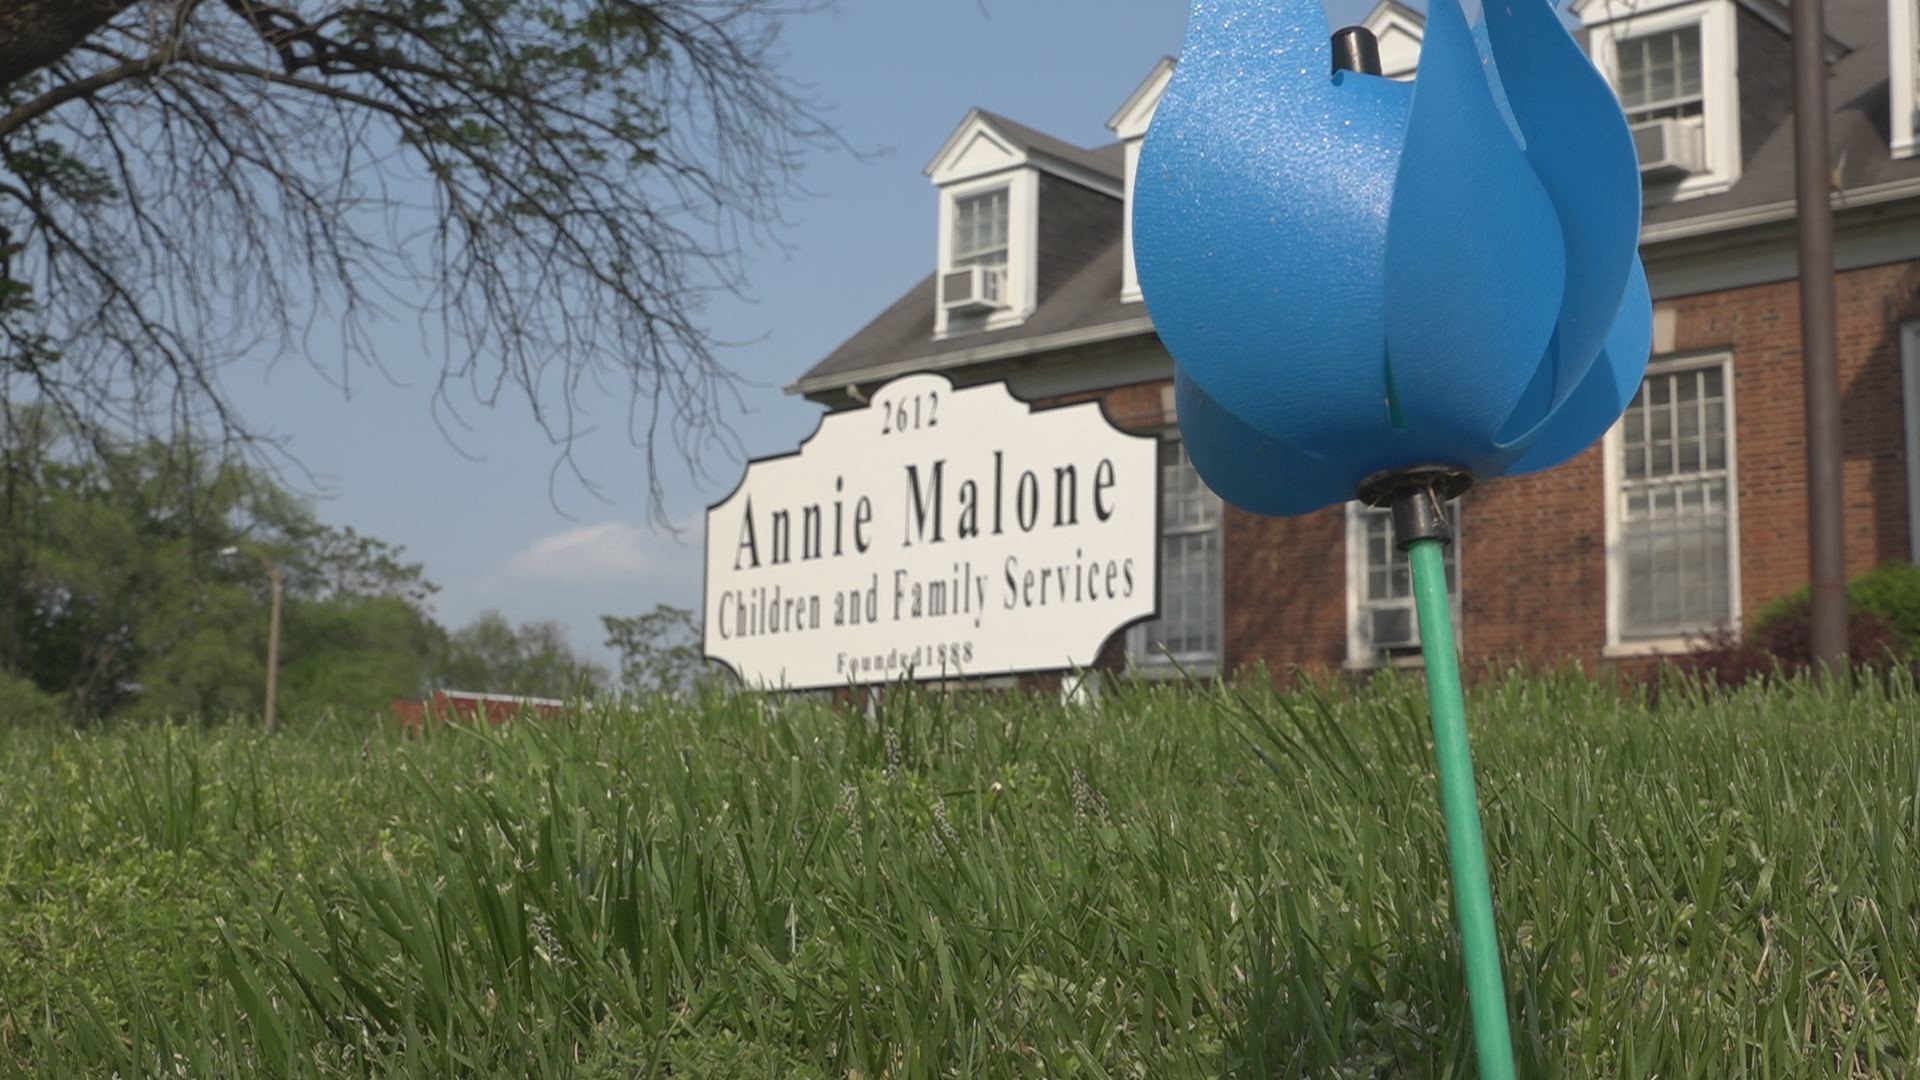 The Annie Malone Children and Family Services has been helping out the community since 1888. It's SAFER Program is a newer program to continue assisting children.